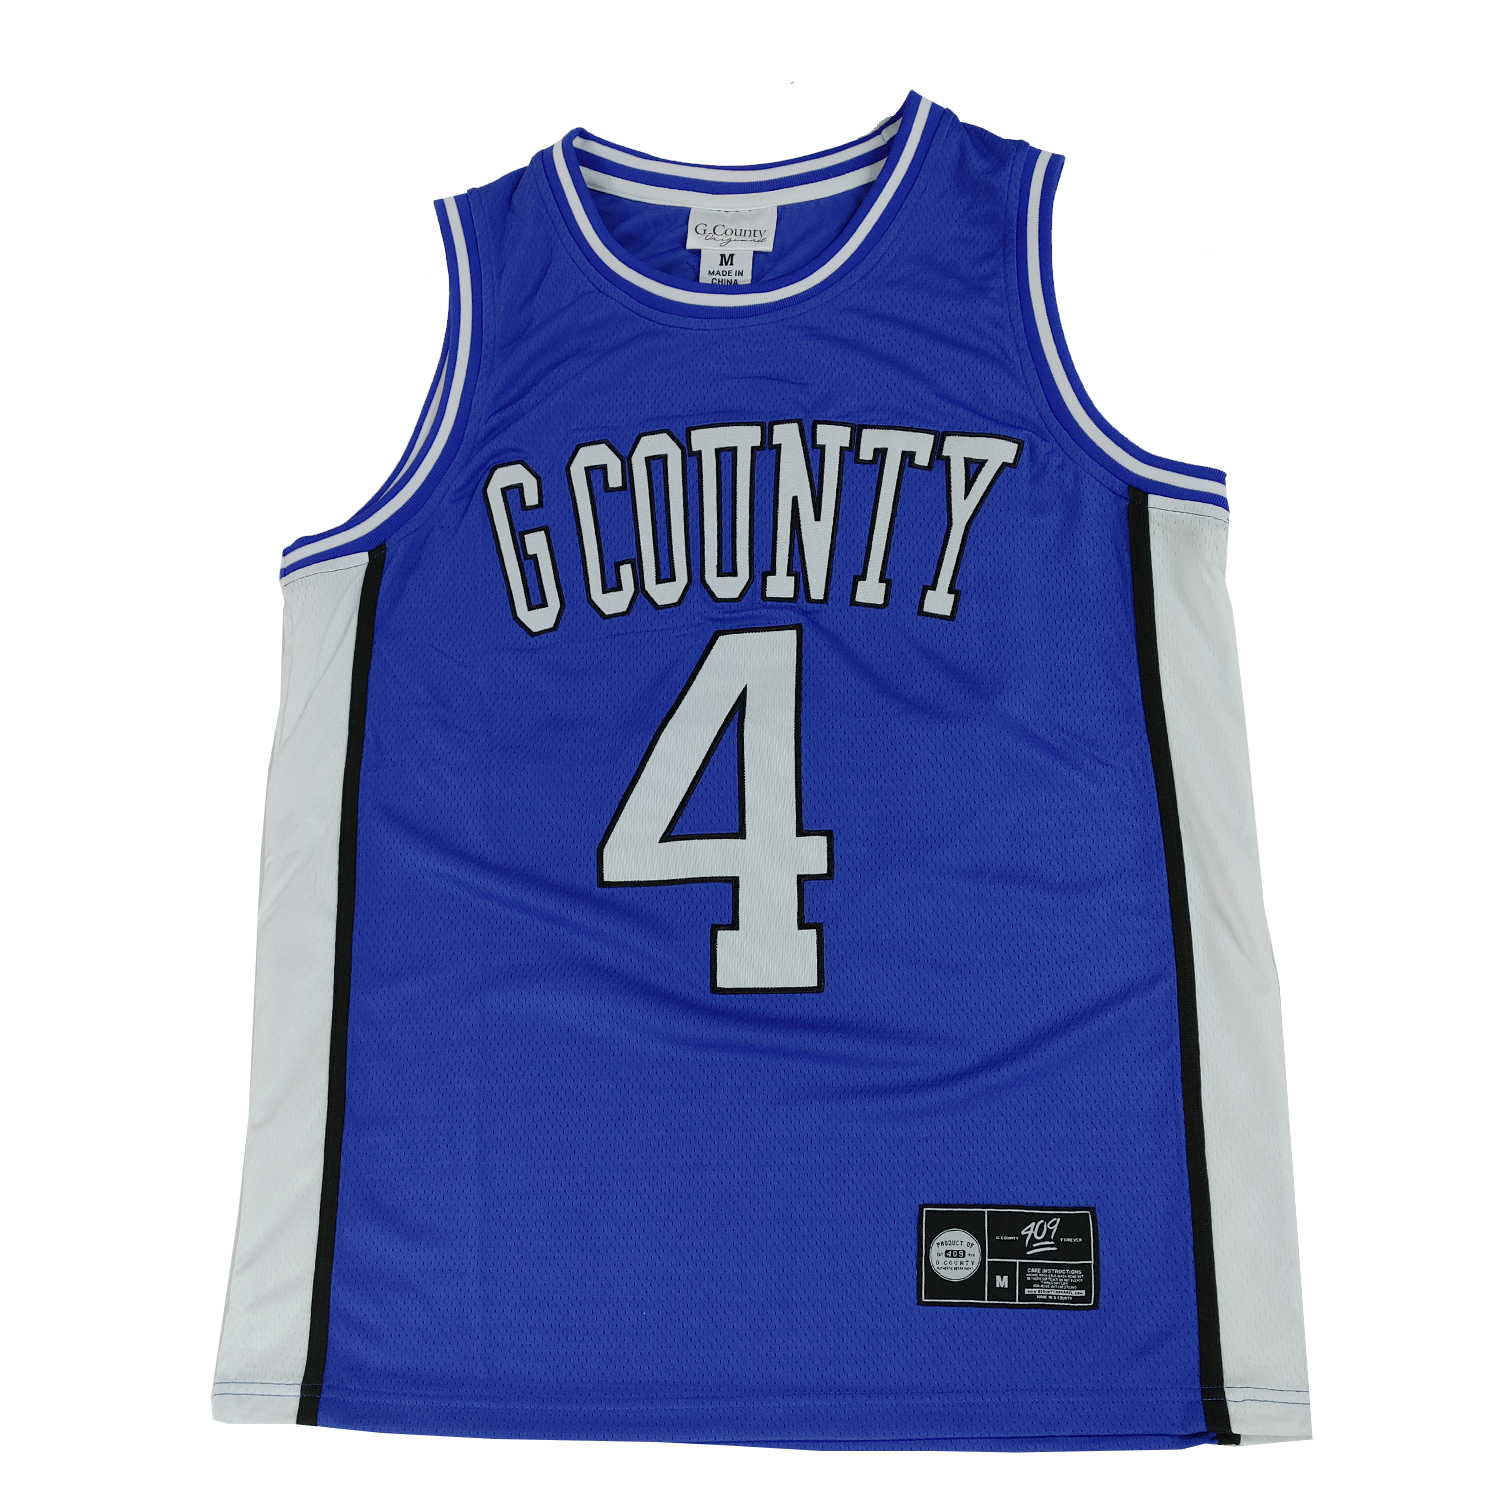 G COUNTY 409 FOREVER JERSEYS